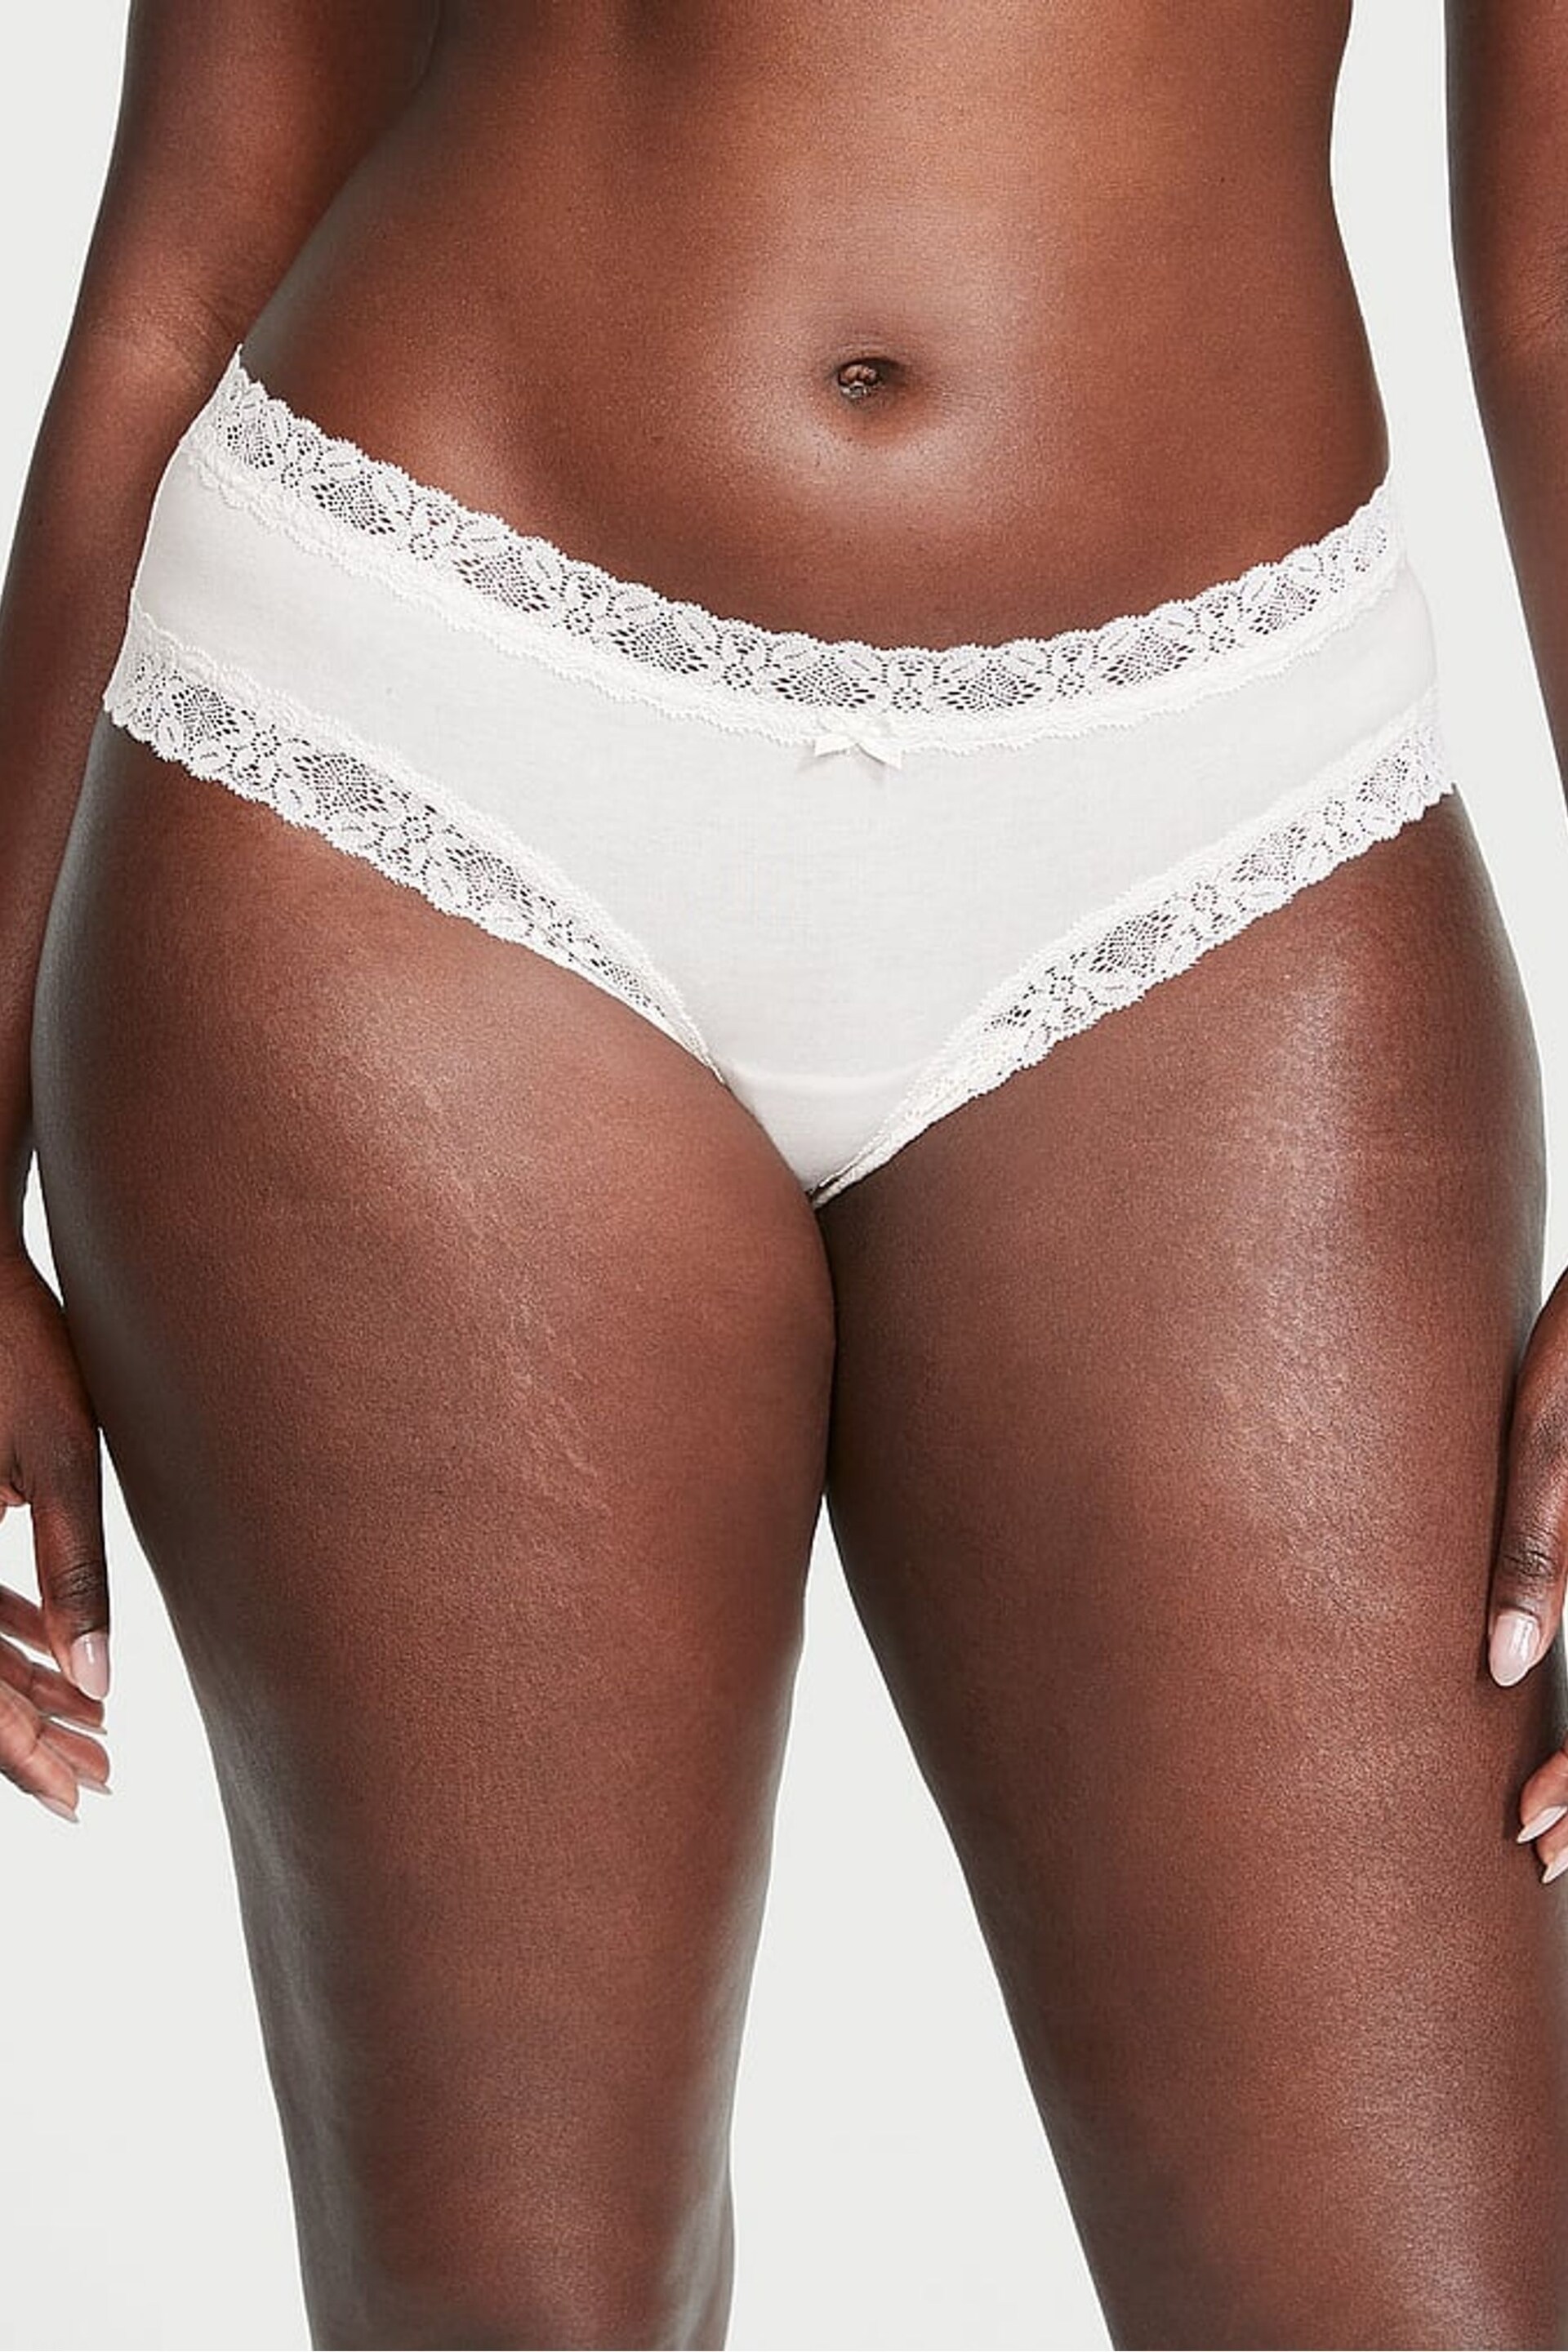 Victoria's Secret Coconut White Cheeky Lace Waist Knickers - Image 1 of 3